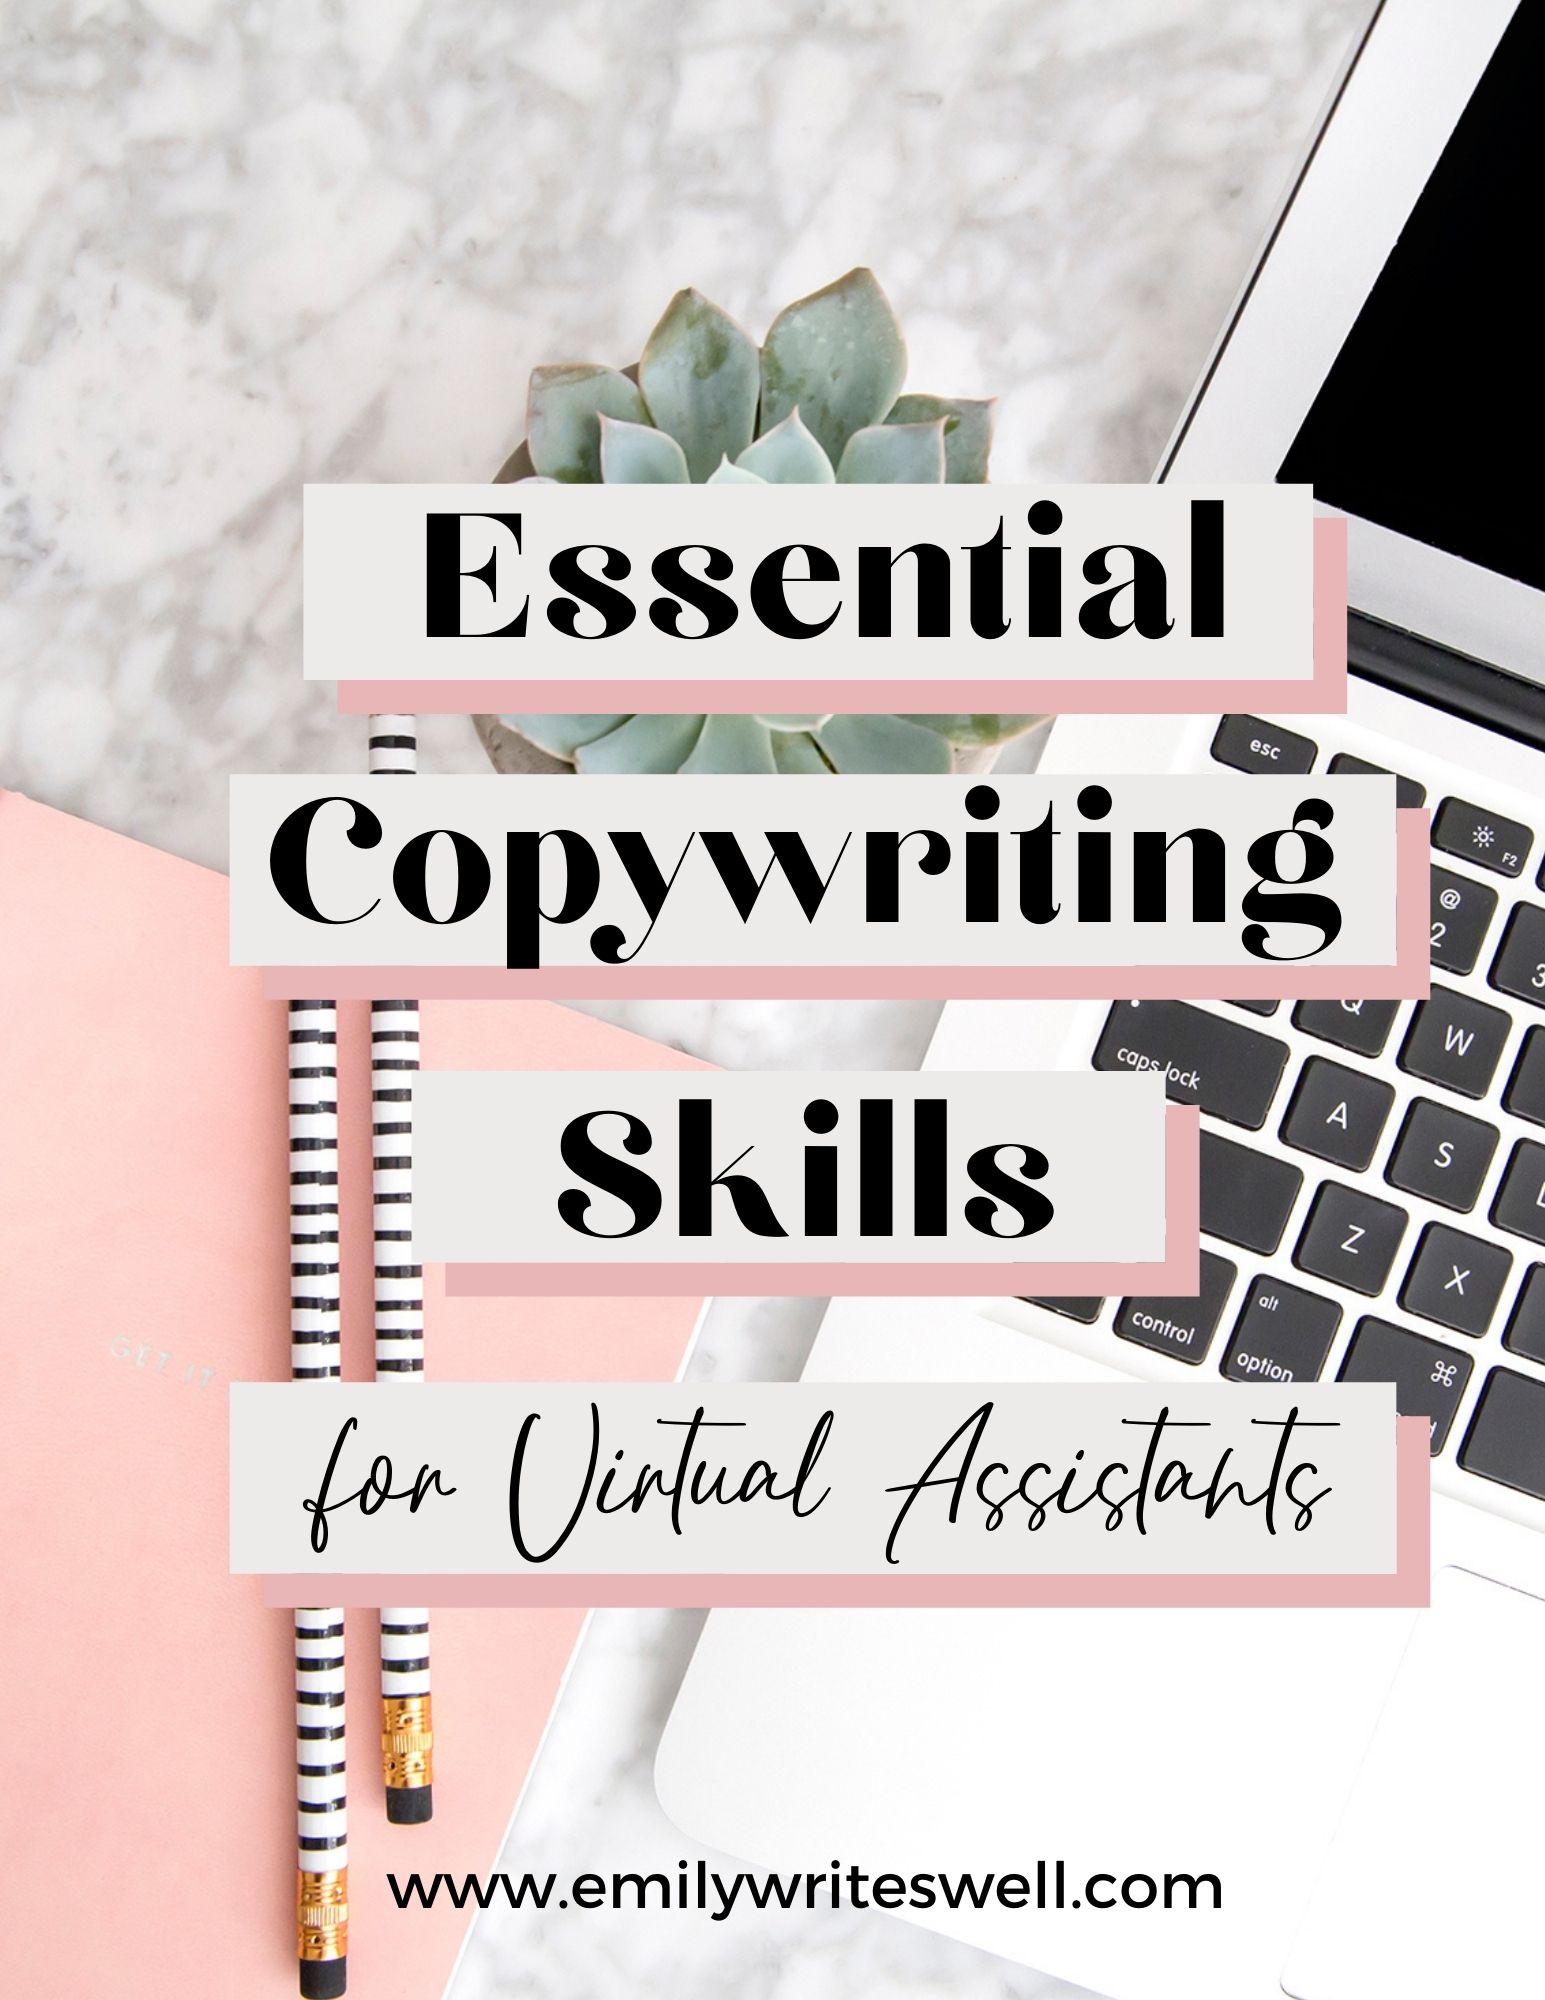 essential copywriting skills for virtual assistants over image of laptop succulent and notebook emilywriteswell.com